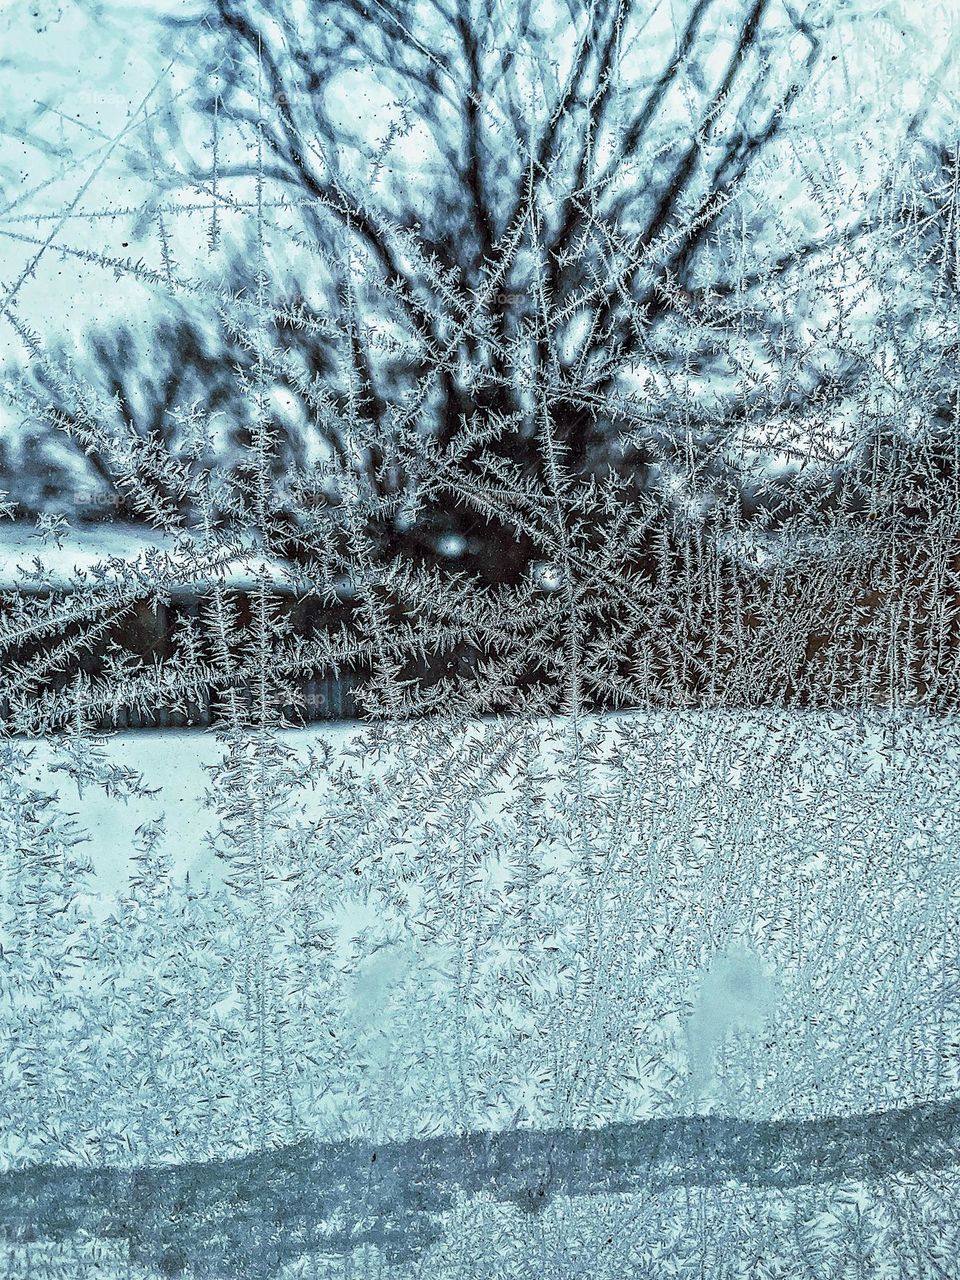 Jack Frost on the windows, icy art on the windows, looking out of the windows in the winter, icy artistry, Jack Frost comes overnight 